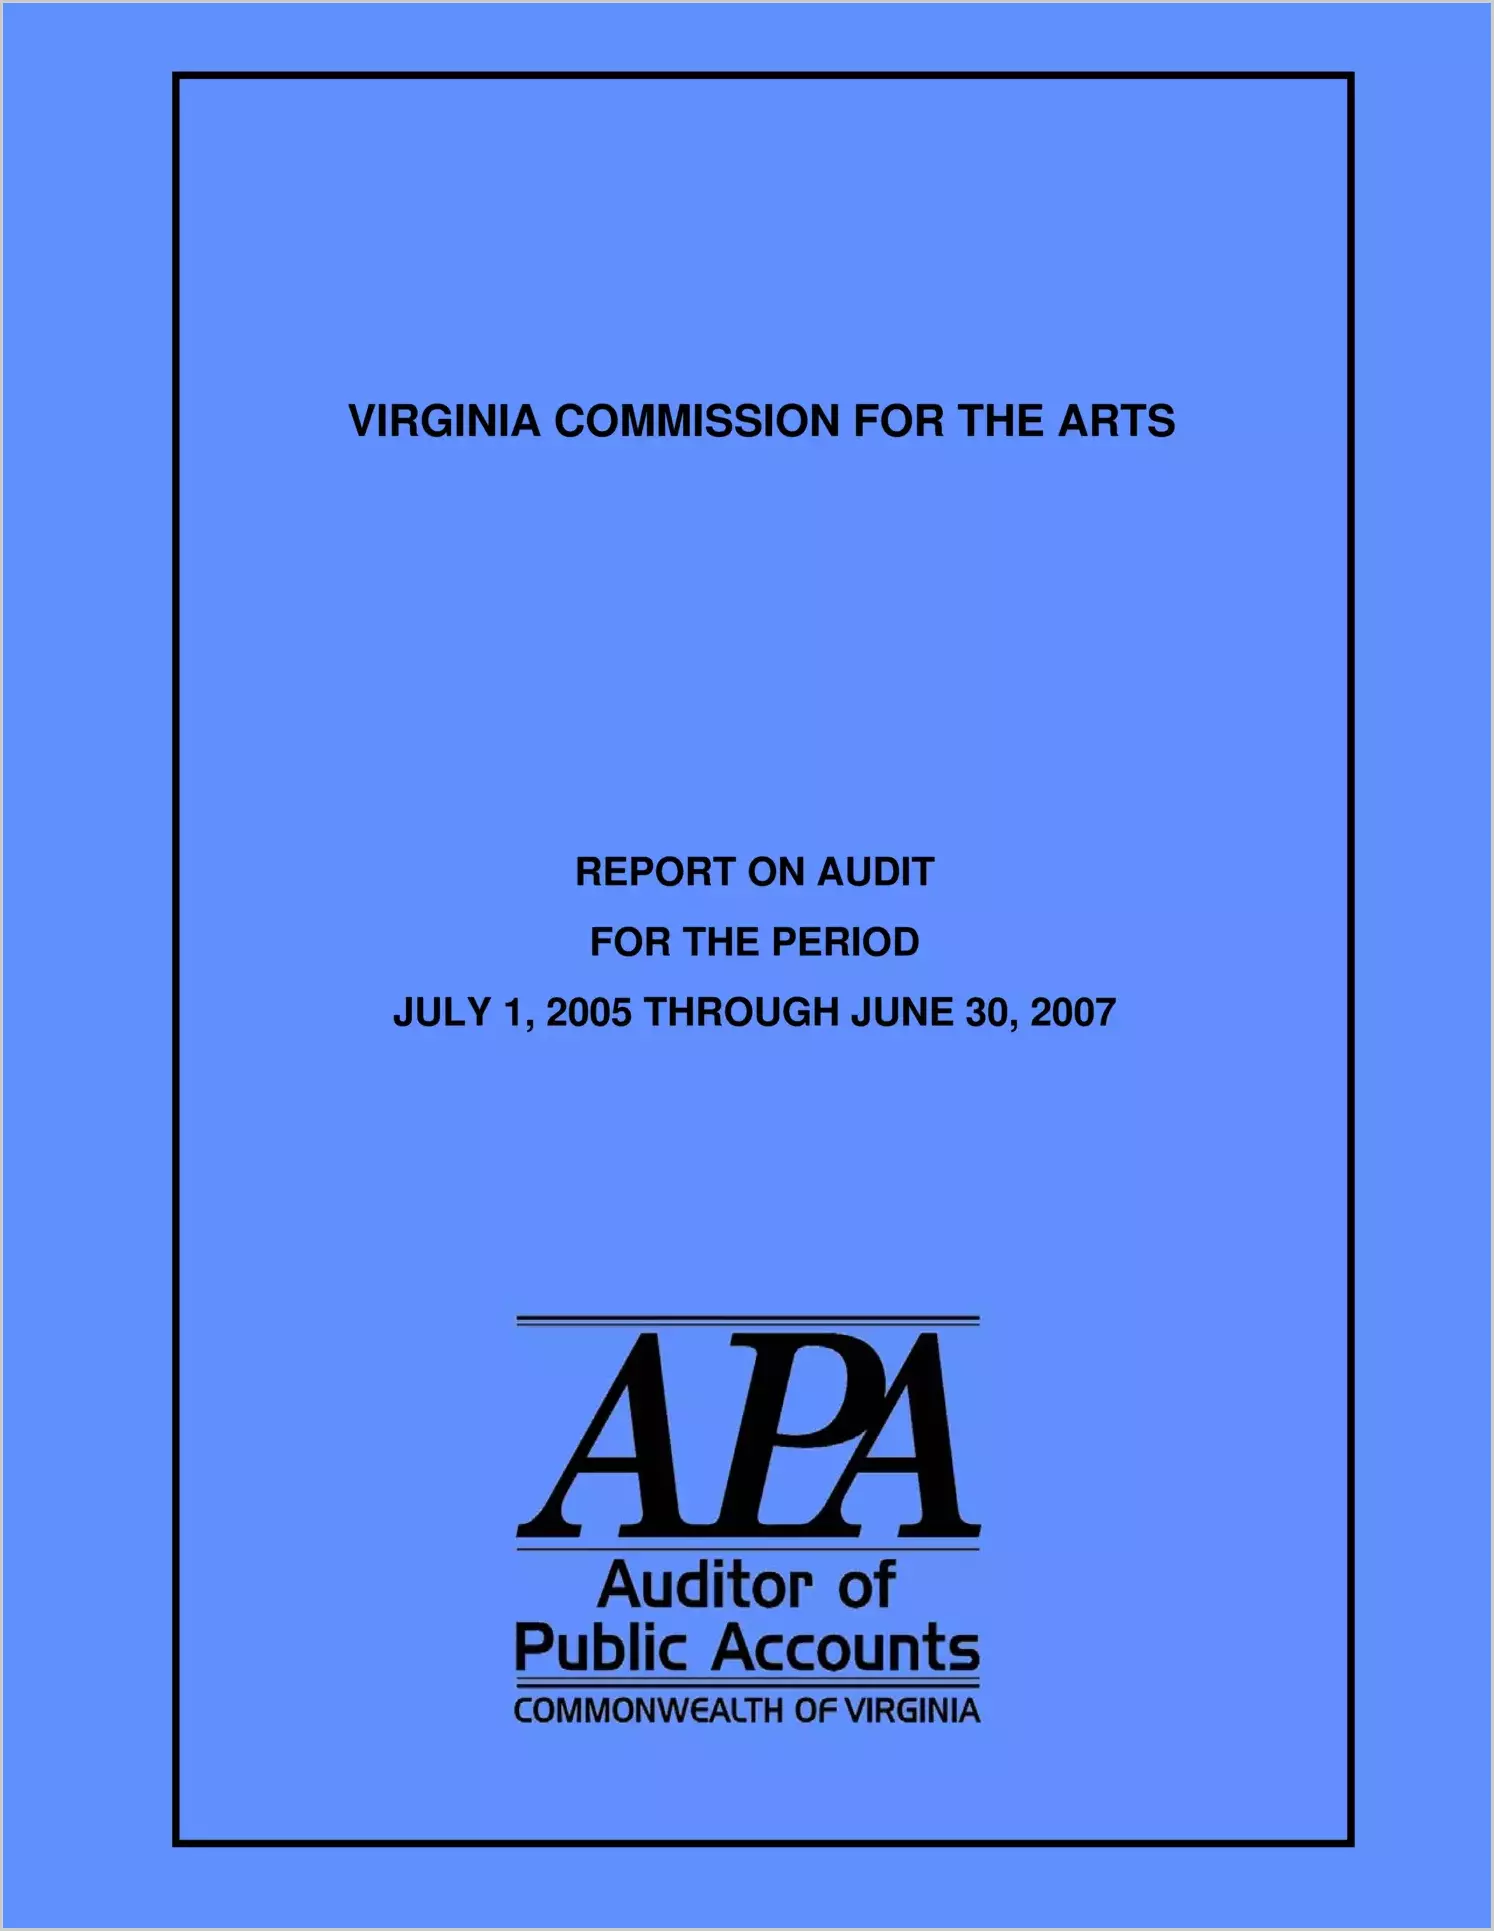 Virginia Commission for the Arts report on audit for the period July 1, 2005 through June 30, 2007